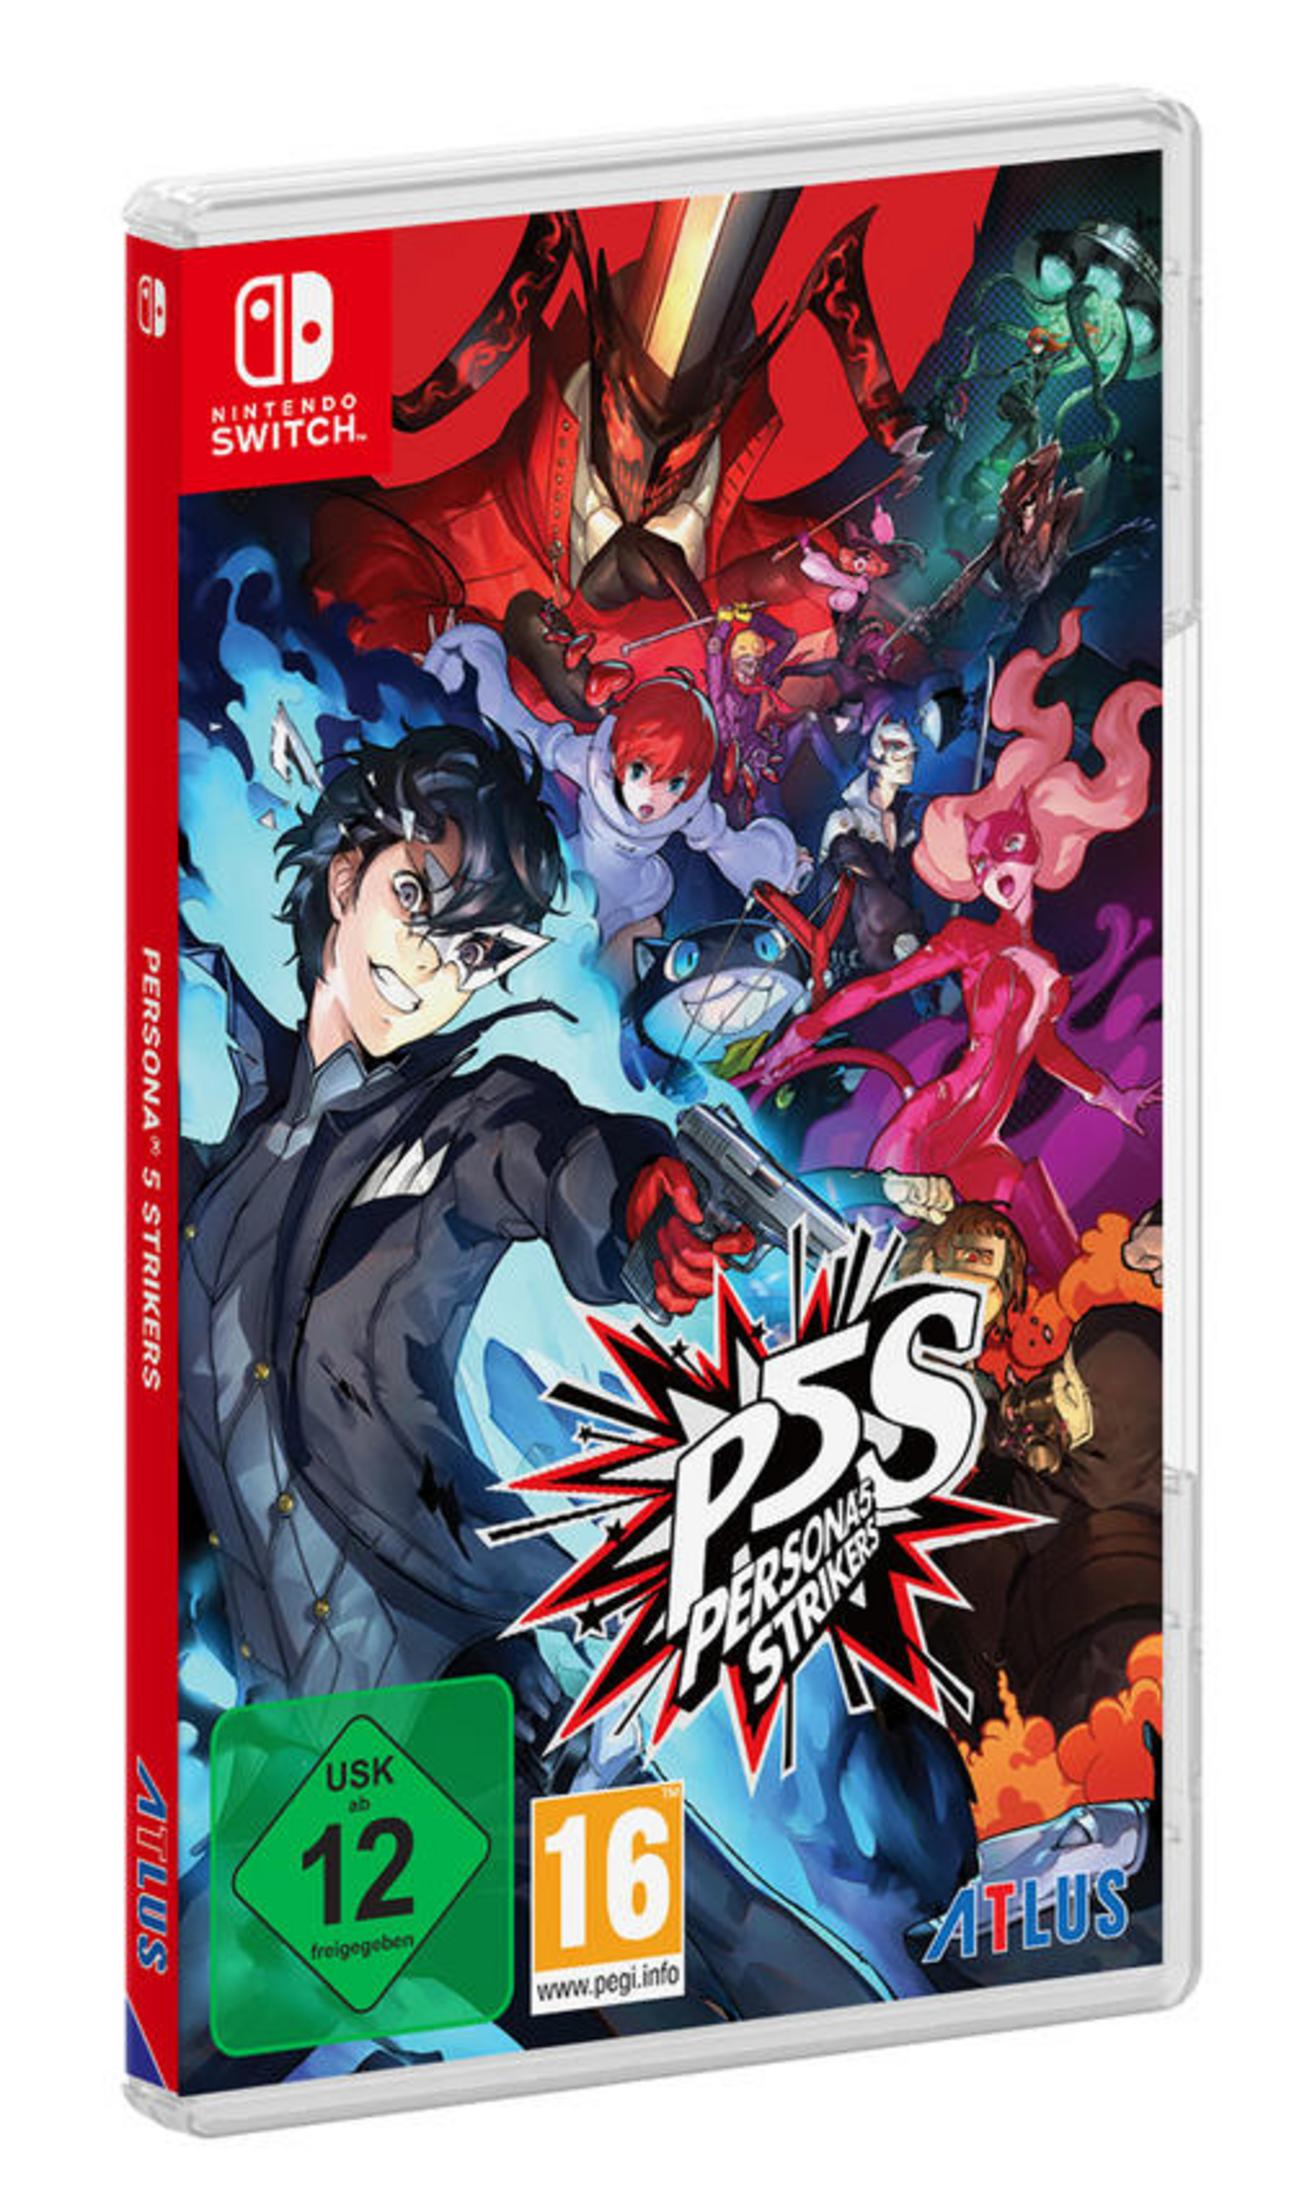 Edition Limited - Persona 5 Switch] [Nintendo Strikers